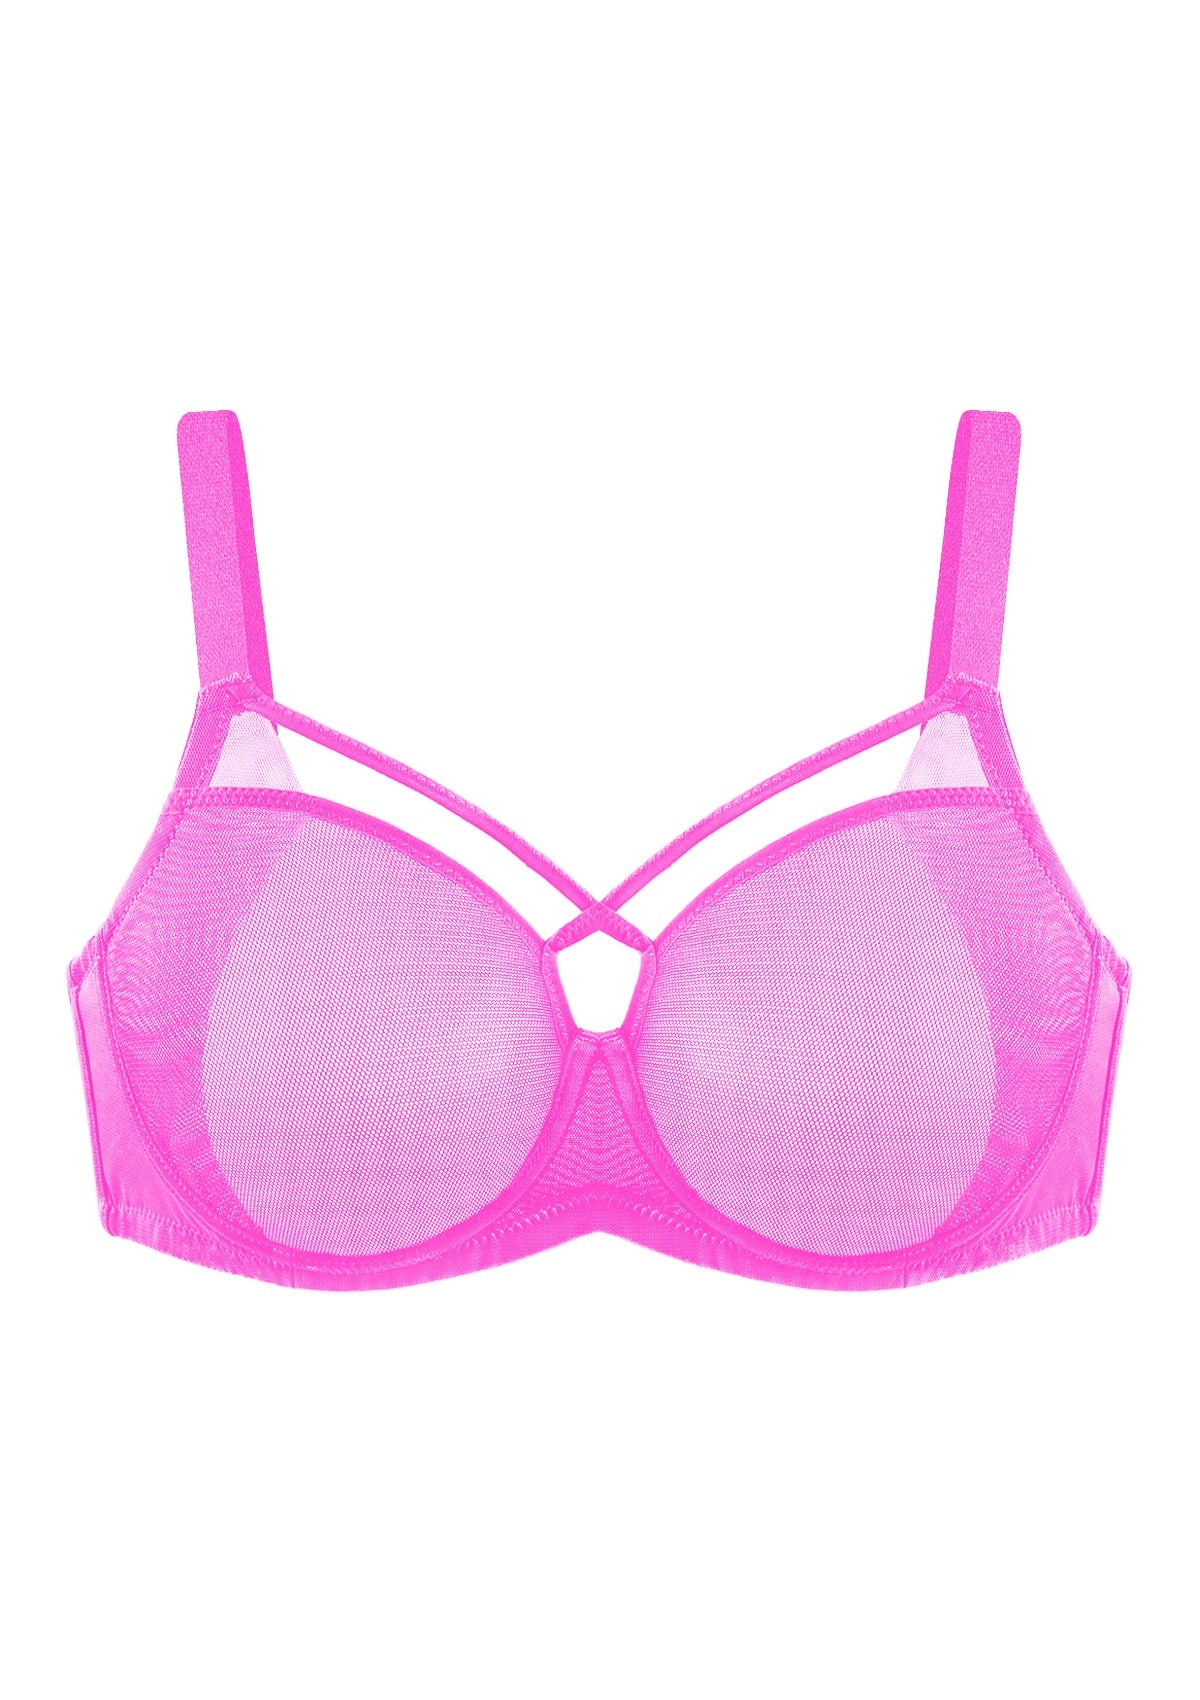 HSIA Billie Cross Front Strap Smooth Sheer Mesh Comfy Underwire Bra - Barbie Pink / 34 / DD/E